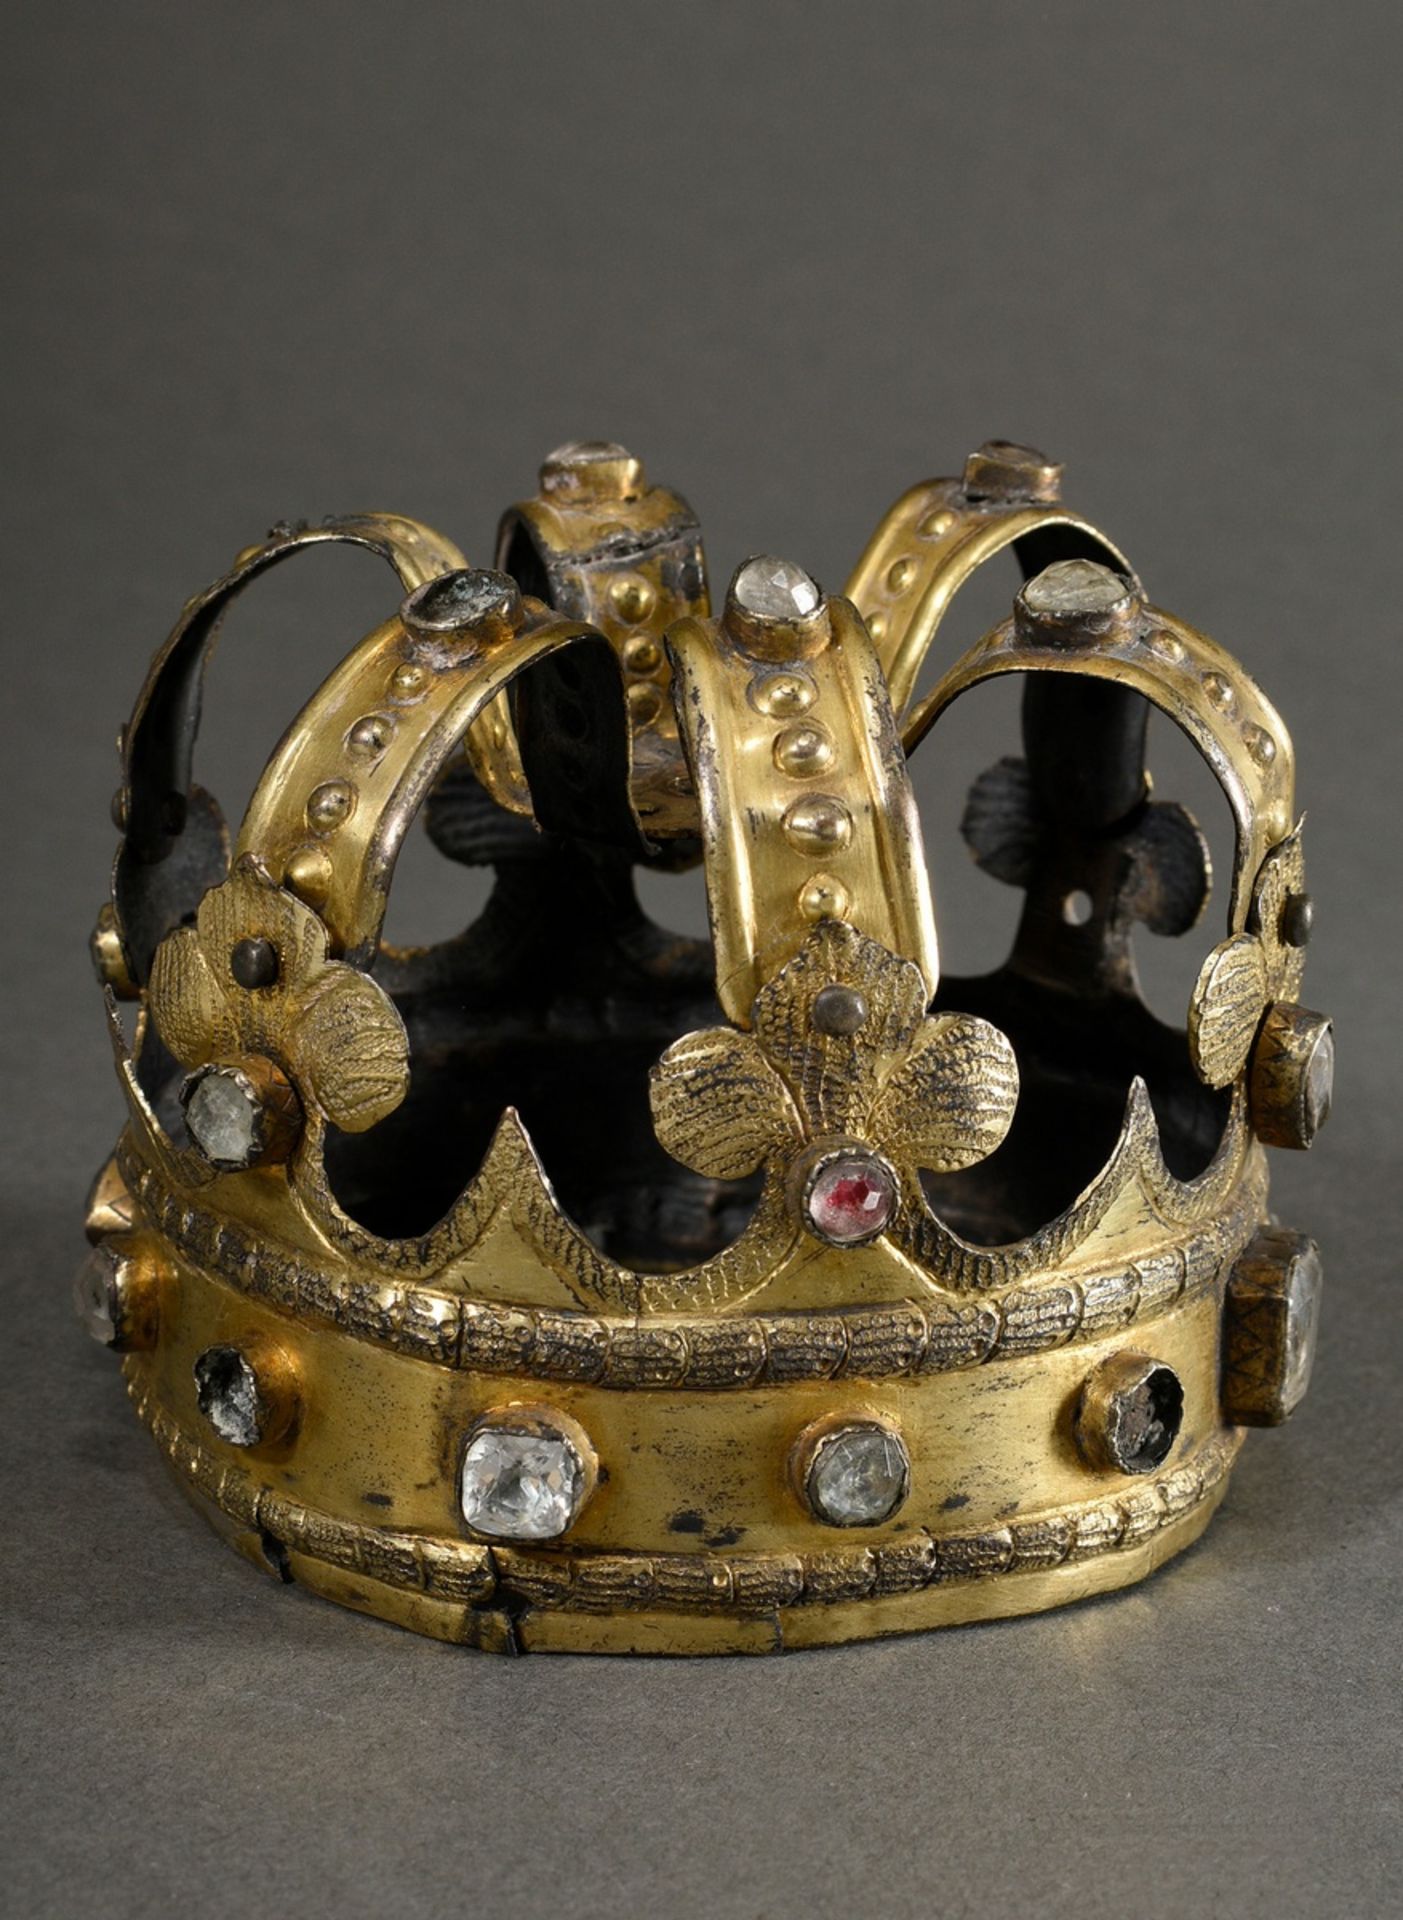 Antique crown of the Virgin Mary with glass stones, probably South German, 19th century, gilt metal - Image 3 of 9